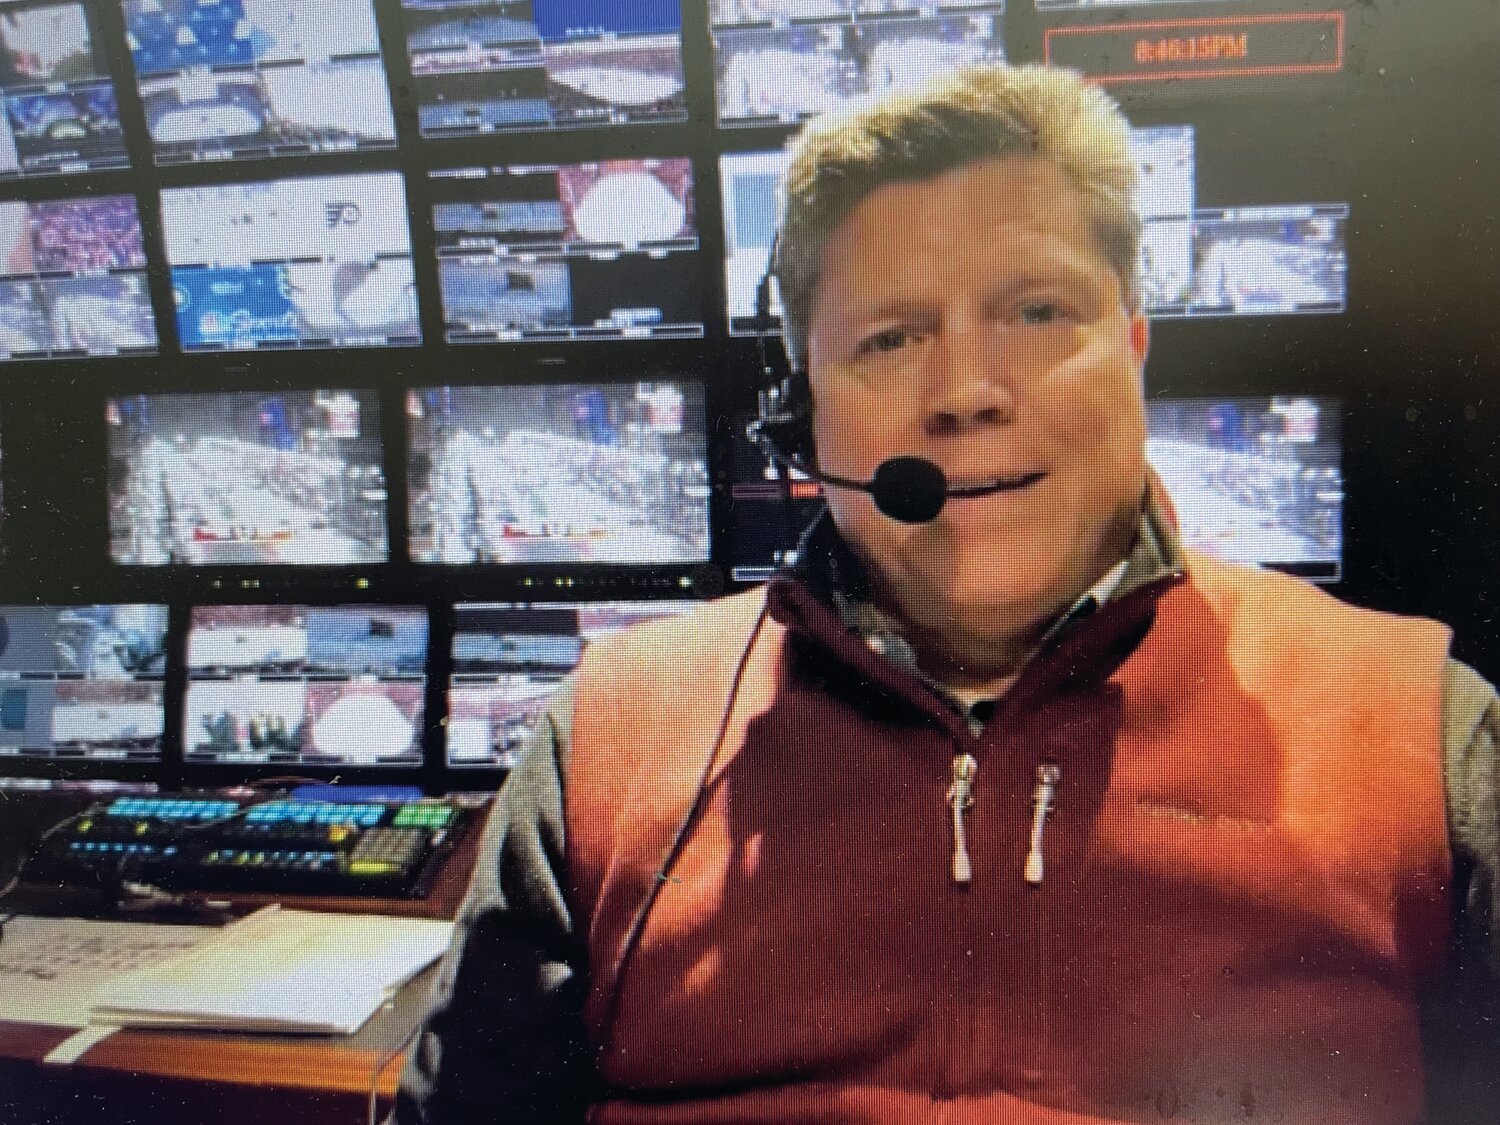 Bryan Cooper, who has been producing Flyers games for Philadelphia television since 1989, is retiring this year.